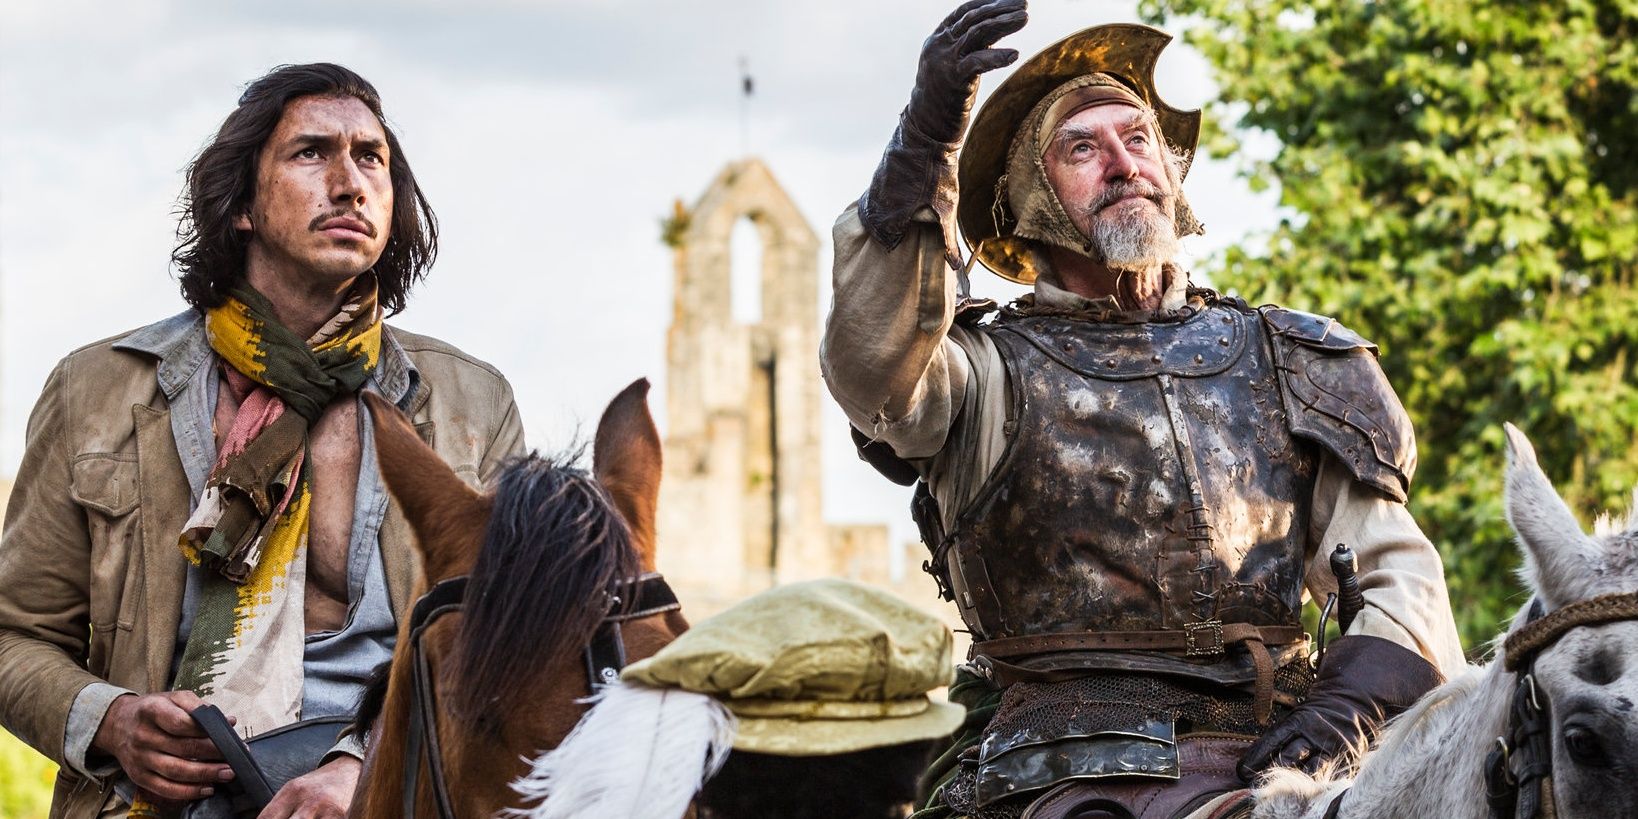 Adam Driver and Jonathan Pryce atop horses in The Man Who Killed Don Quixote